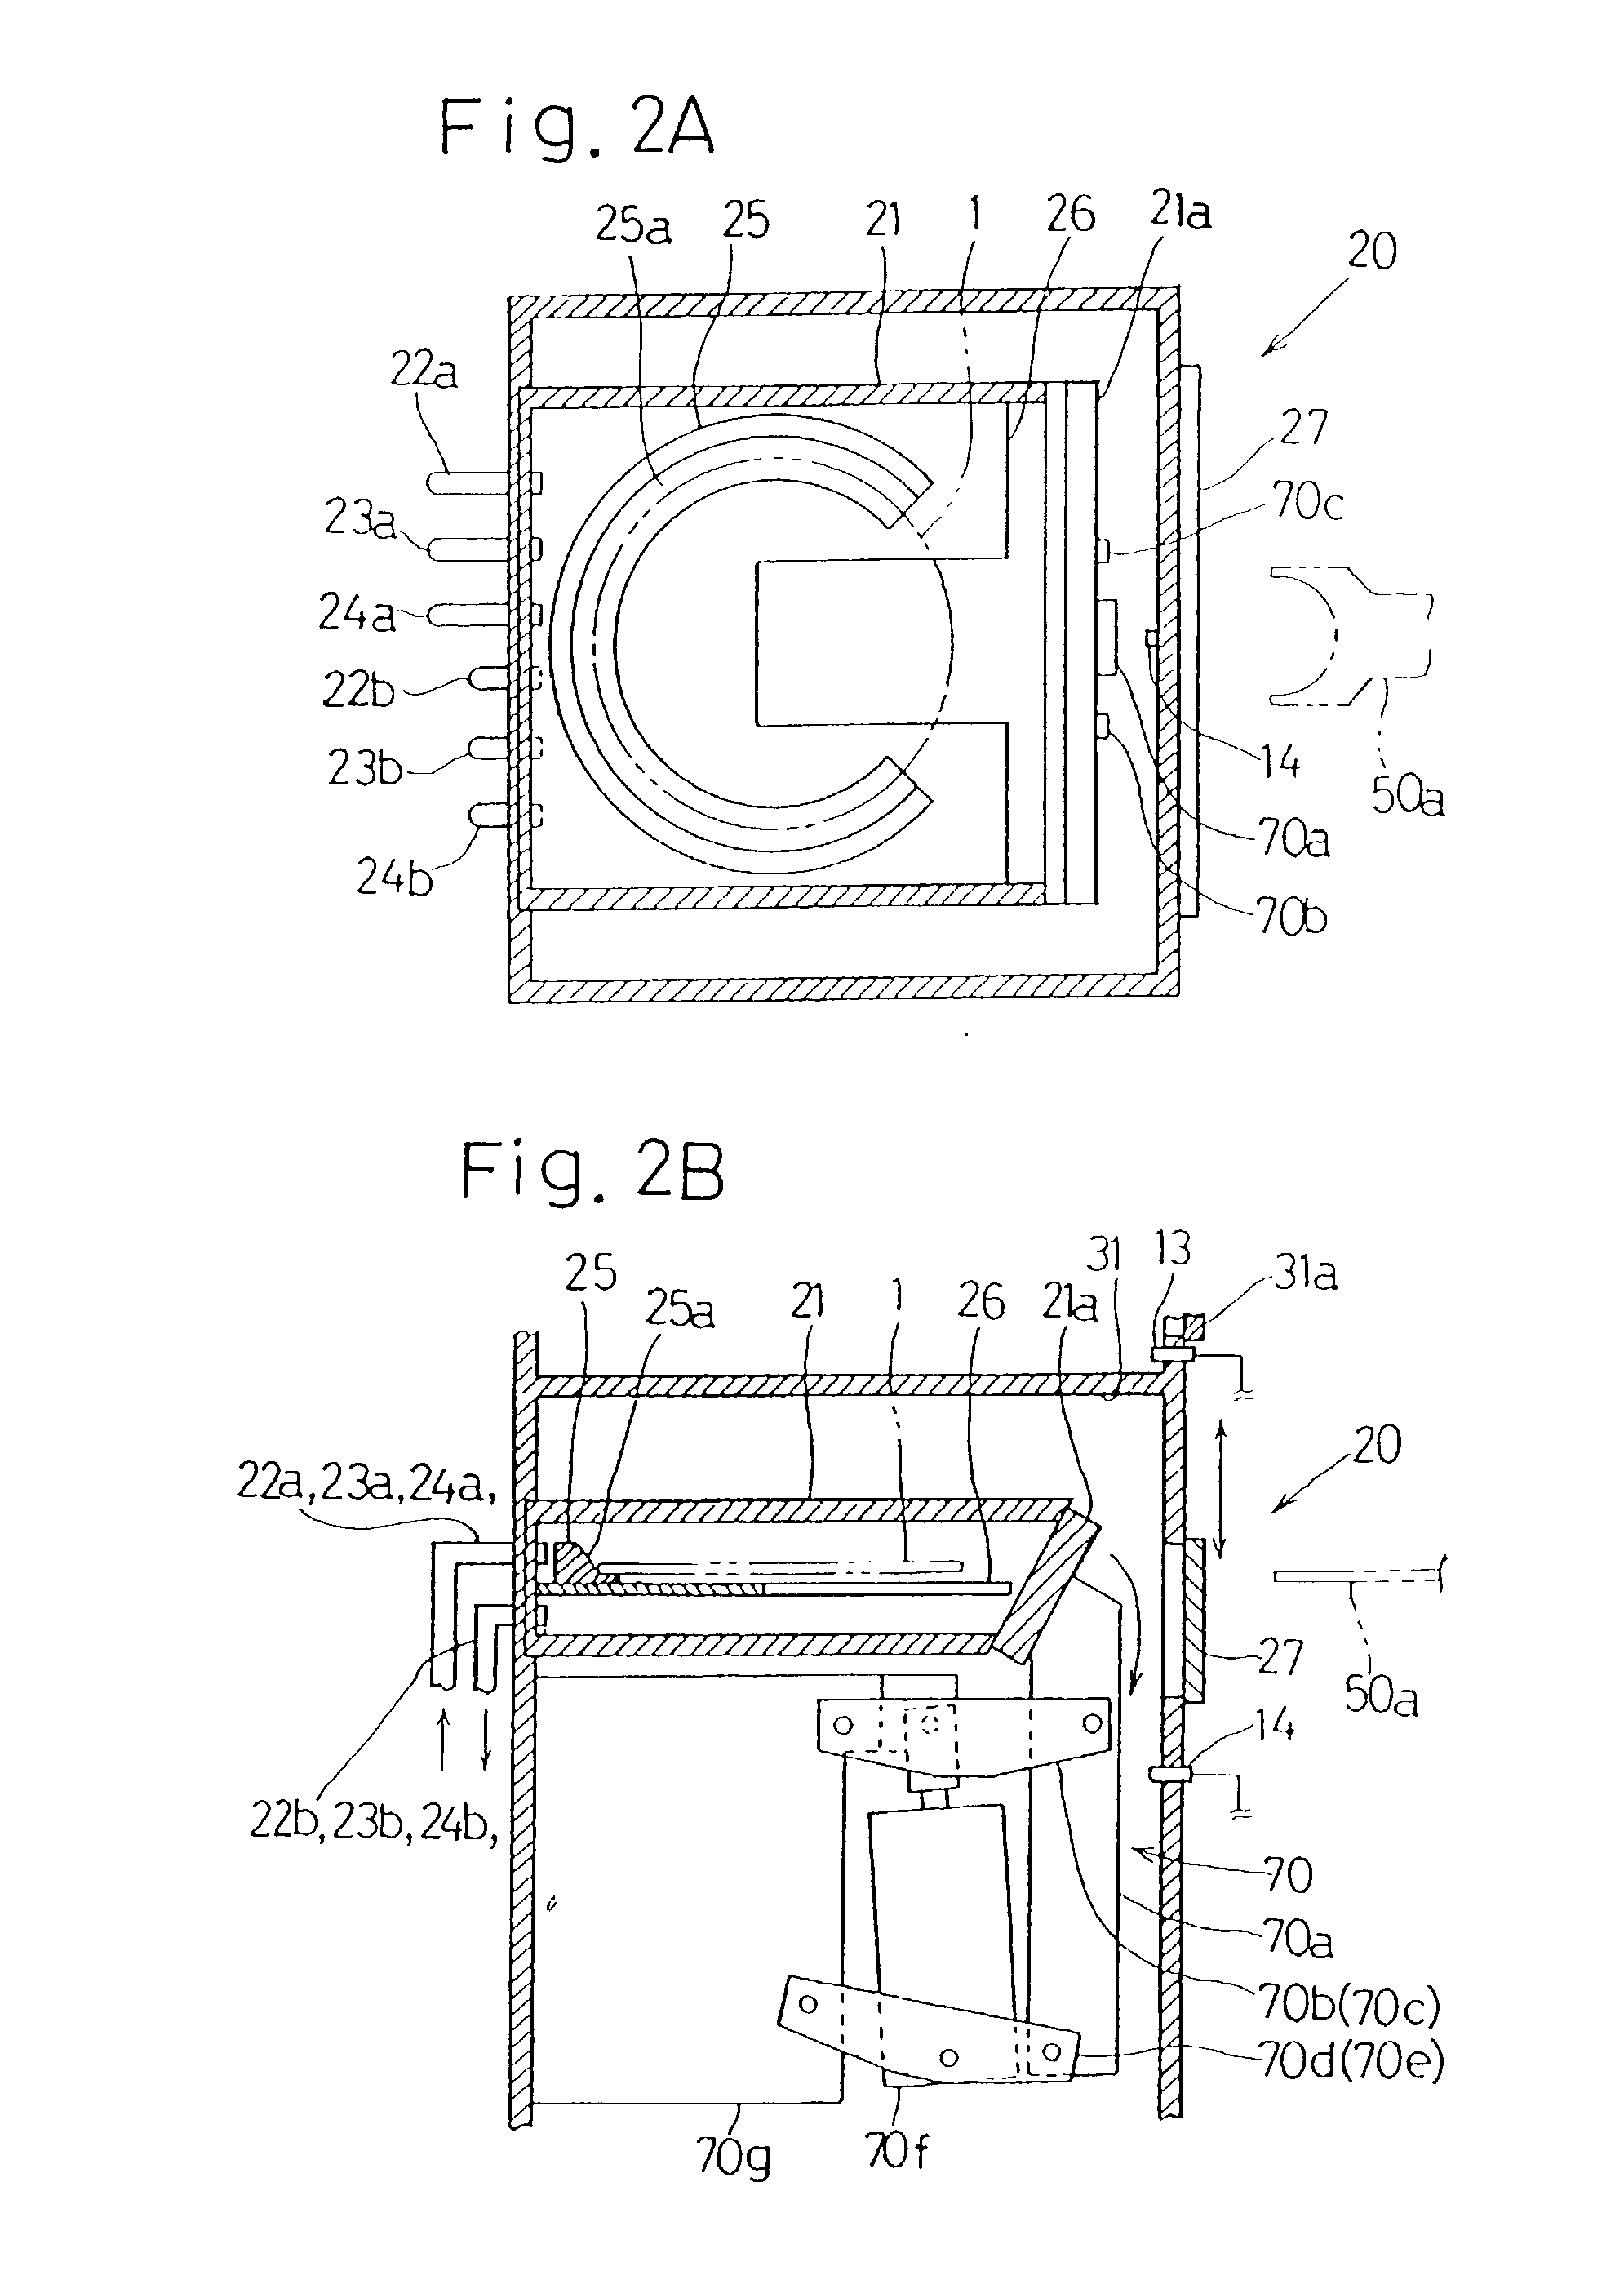 Sample preprocessing system for a fluorescent X-ray analysis and X-ray fluorescence spectrometric system using the same